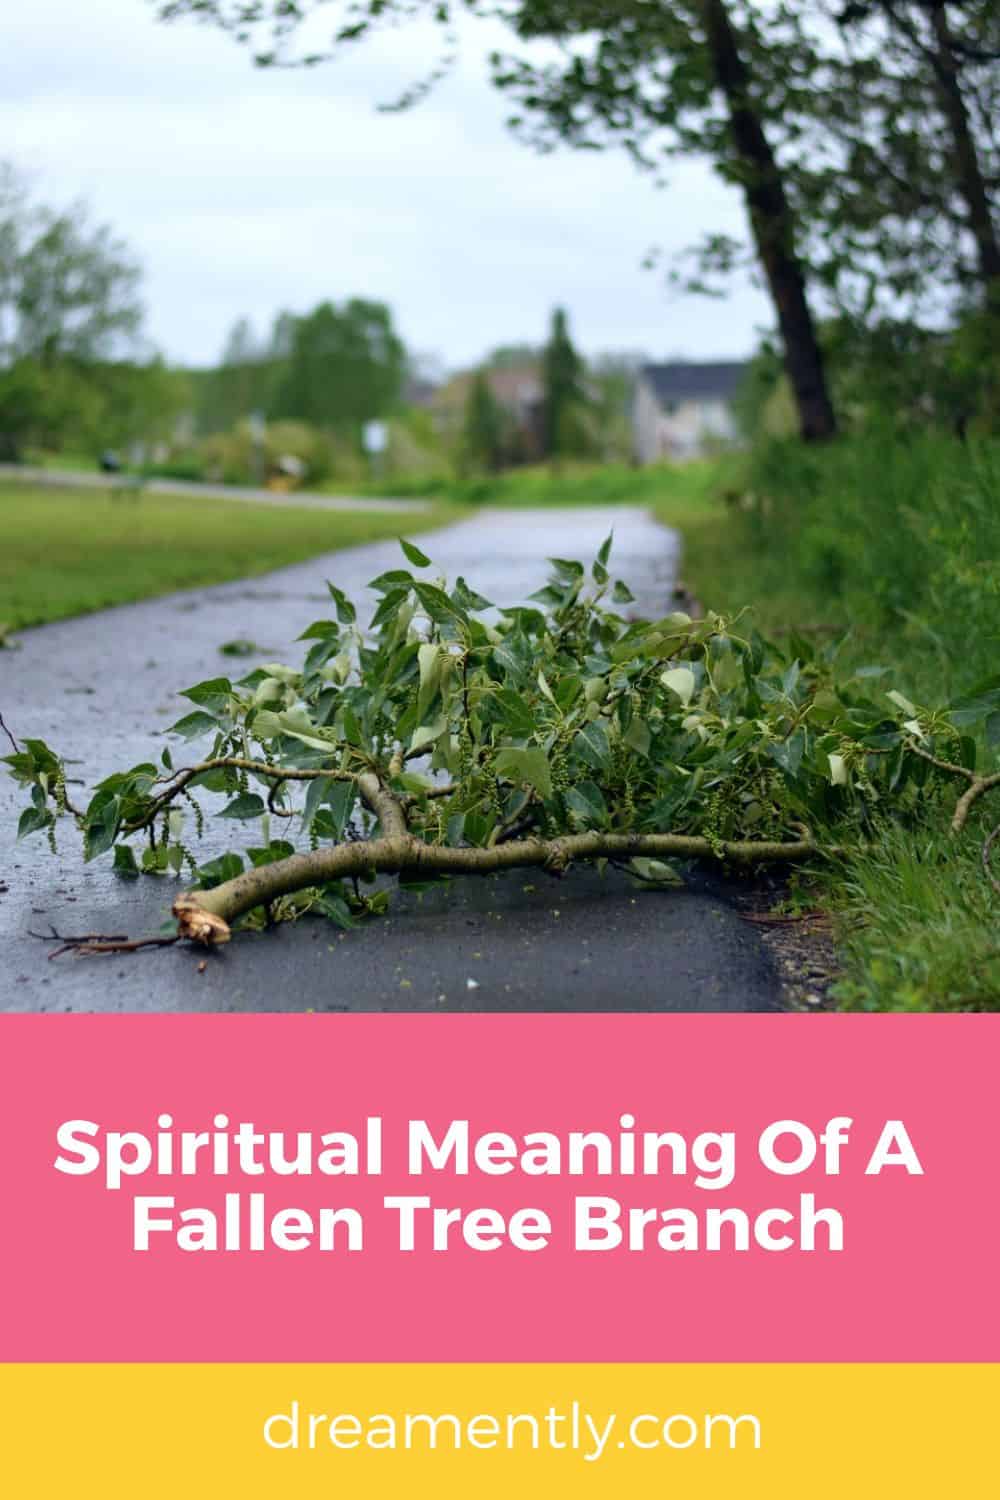 Spiritual Meaning Of A Fallen Tree Branch